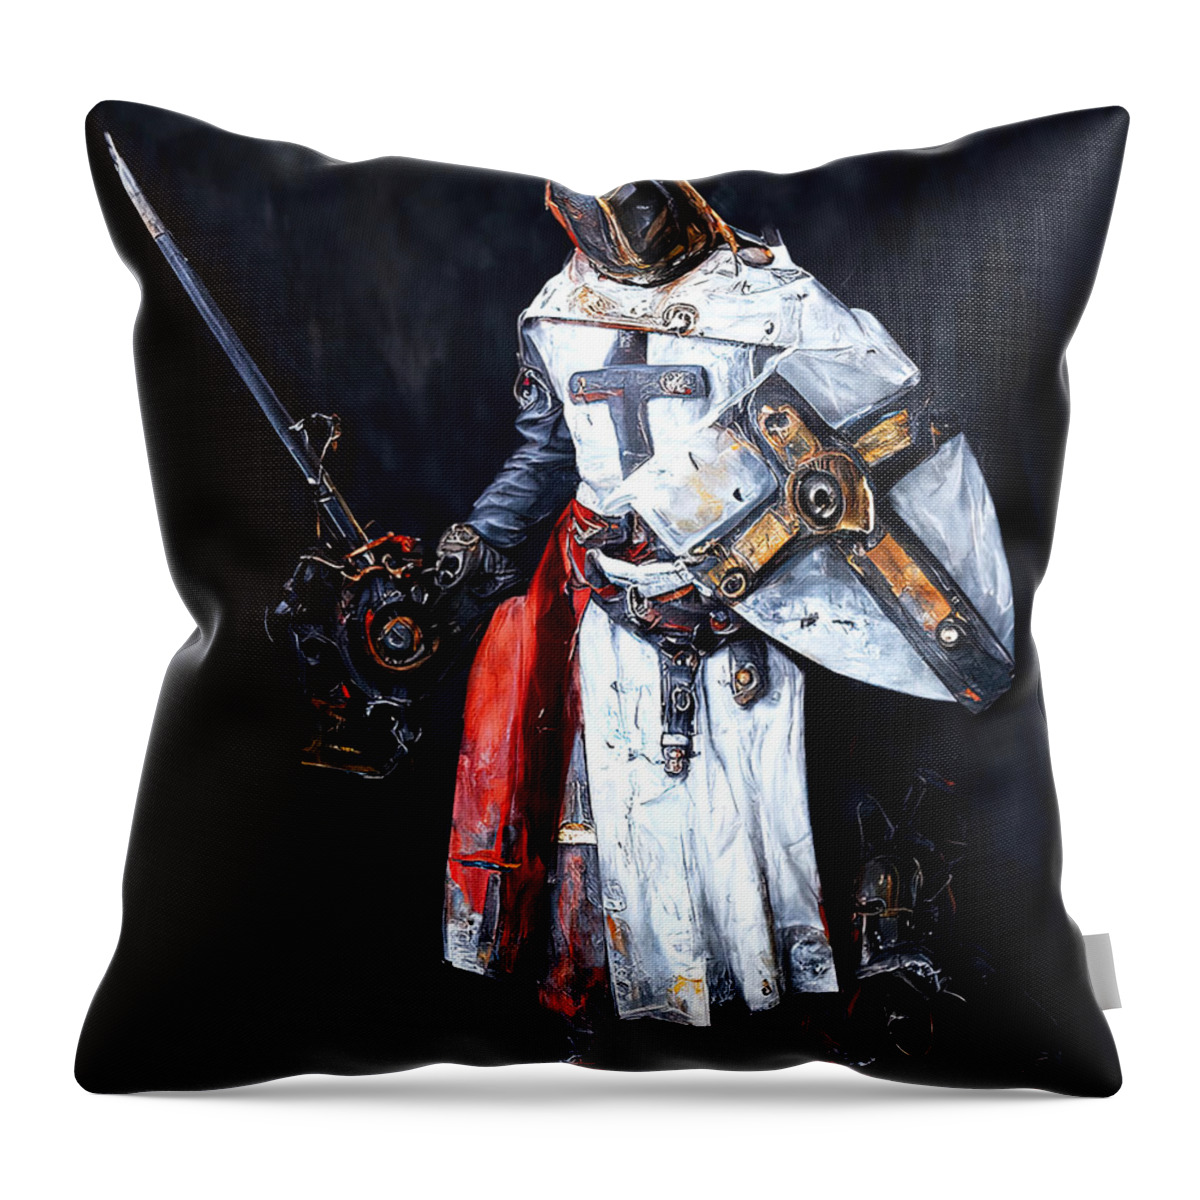 Steampunk Throw Pillow featuring the painting Steampunk Crusader Warrior by AM FineArtPrints